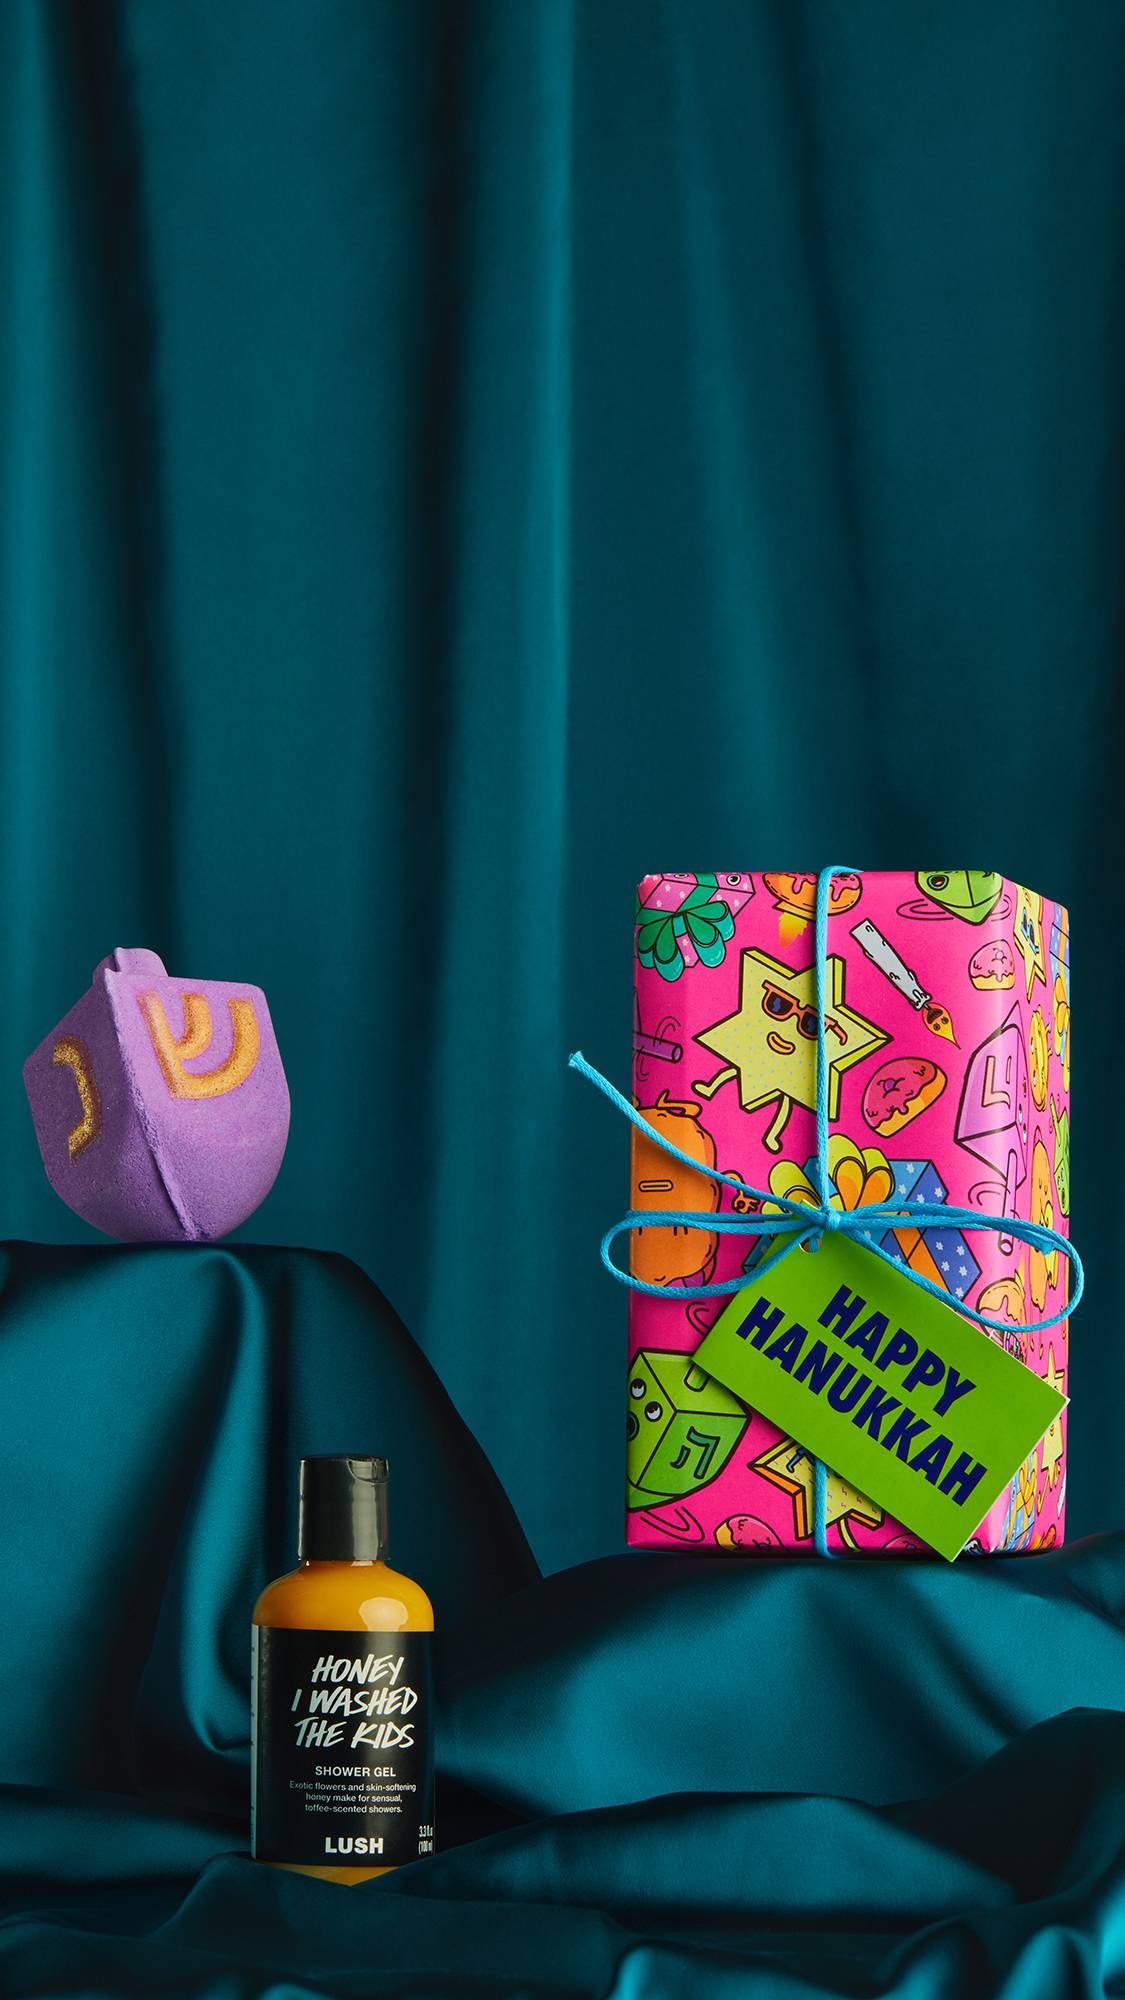 The Happy Hanukkah gift box, themed bath bomb and shower gel are sat at differing heights on top of a satin teal cloth. 